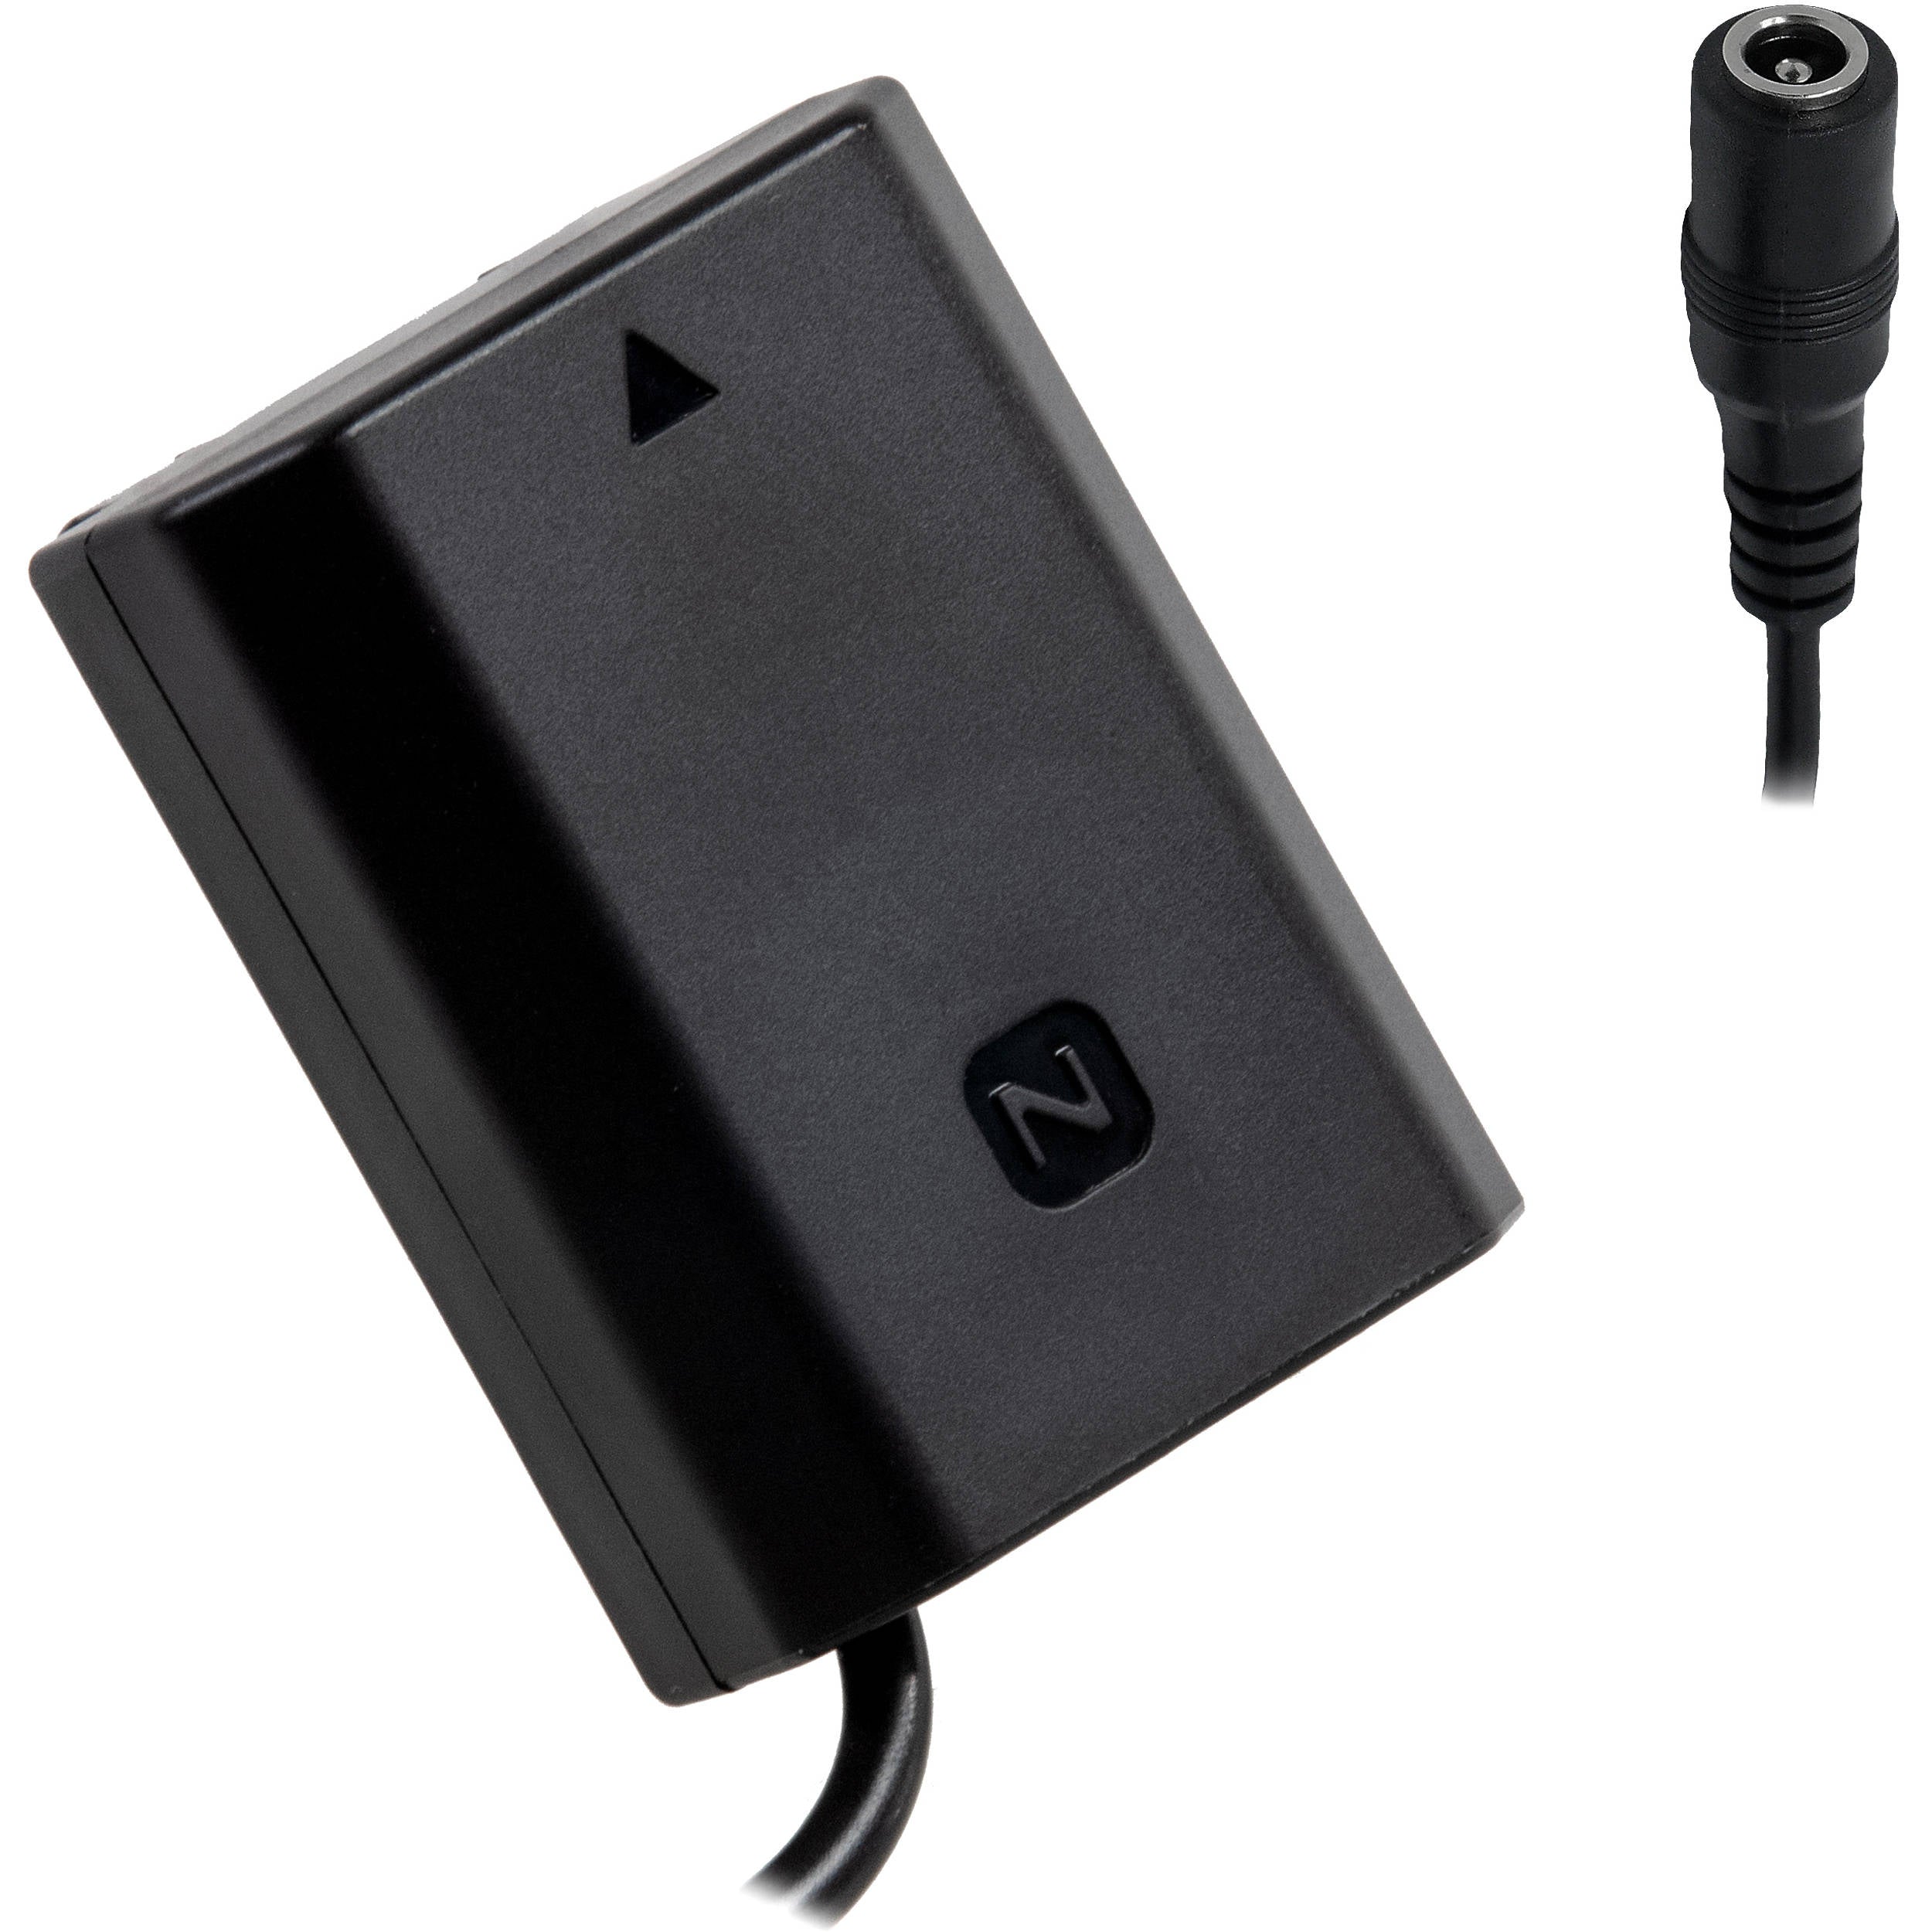 Tilta Sony a9 Series Dummy Battery to 5.5/2.5mm Female Barrel Cable (17")